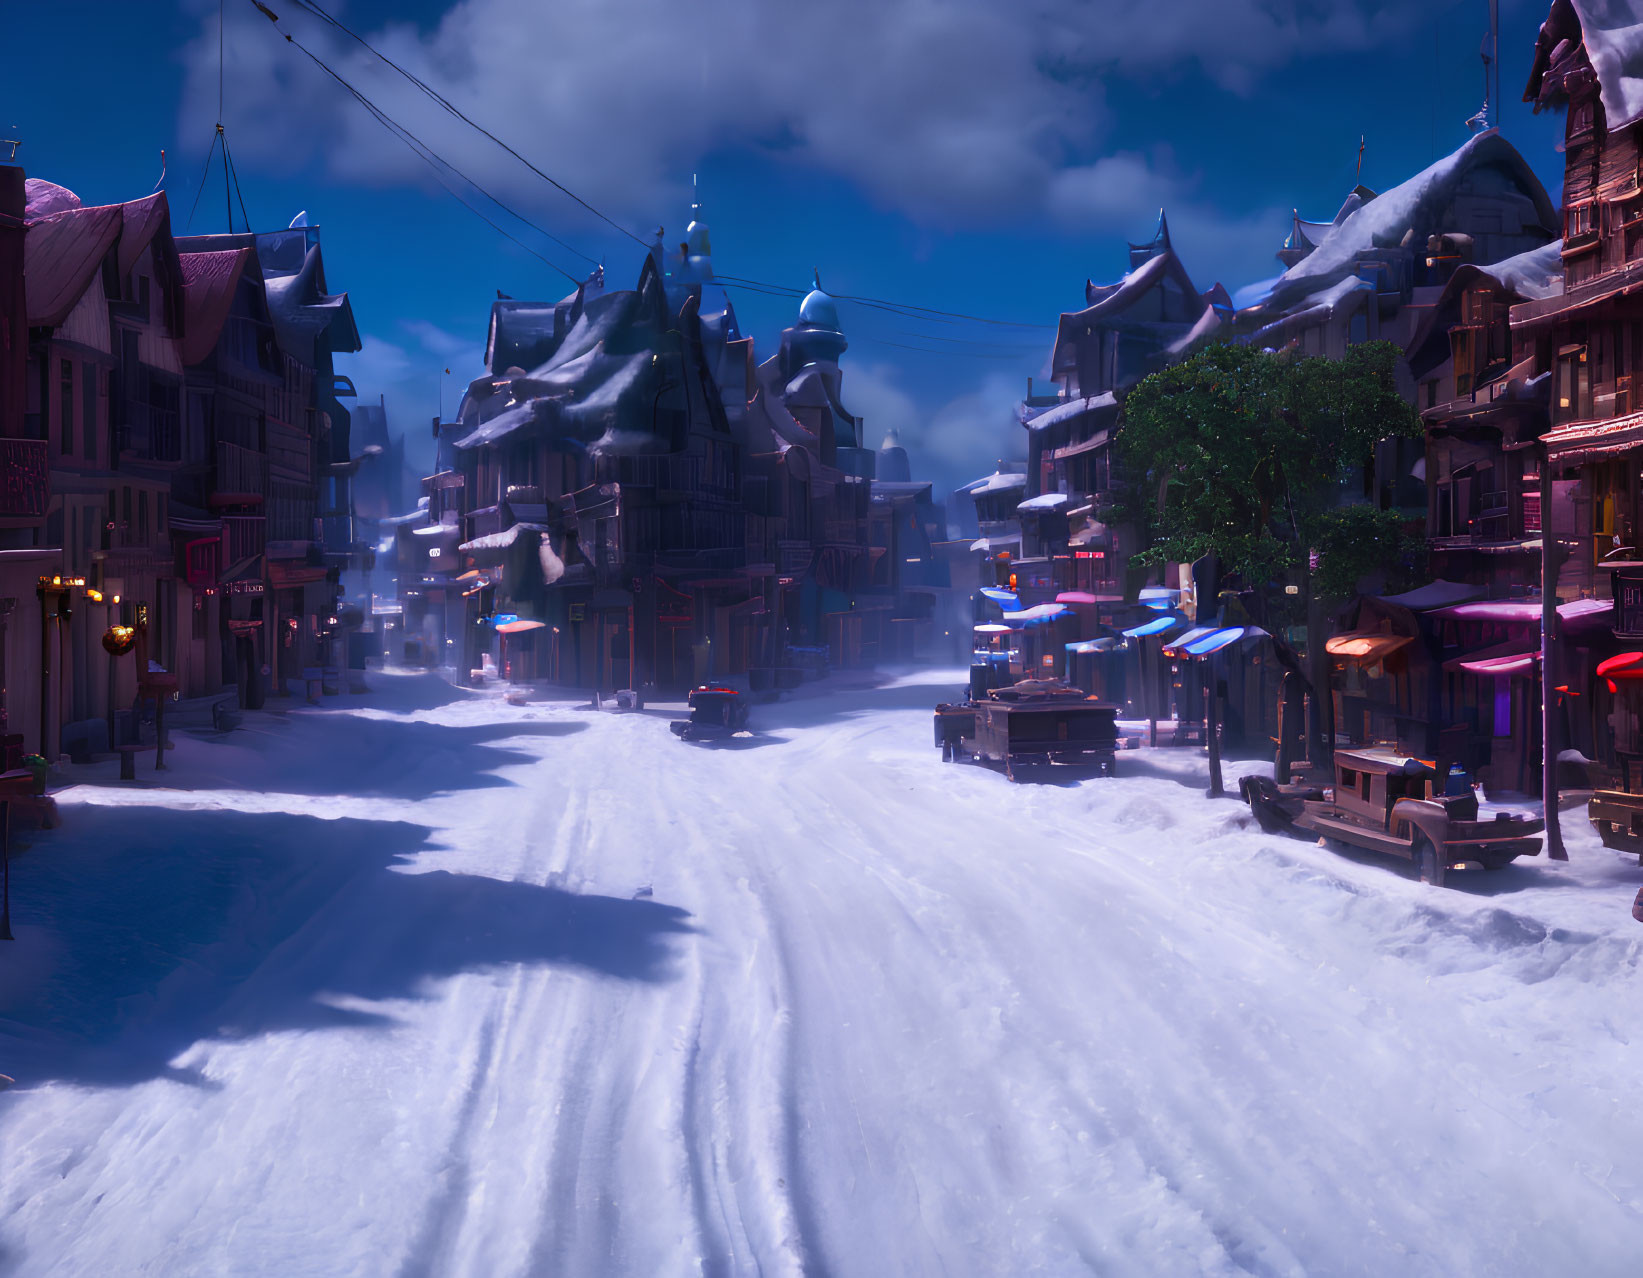 Snow-covered village street with illuminated buildings under twilight sky